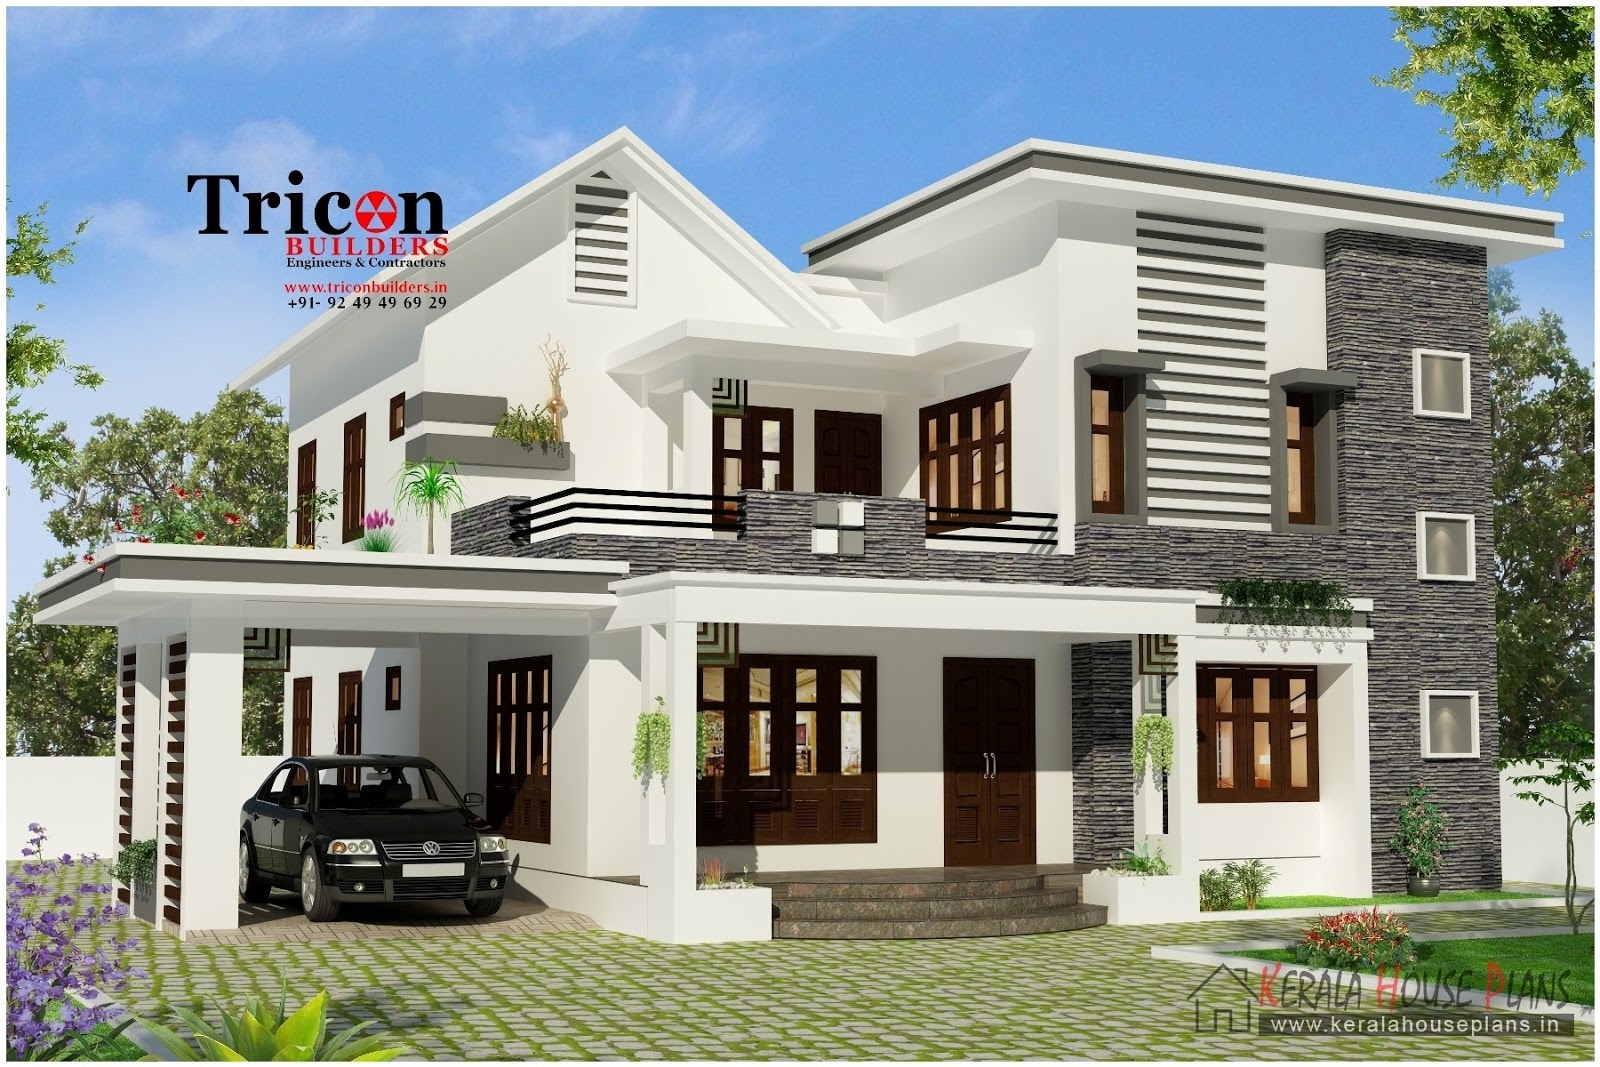 Classy 4 bedroom modern house design 2355 sq ft with 4 bedroom house design